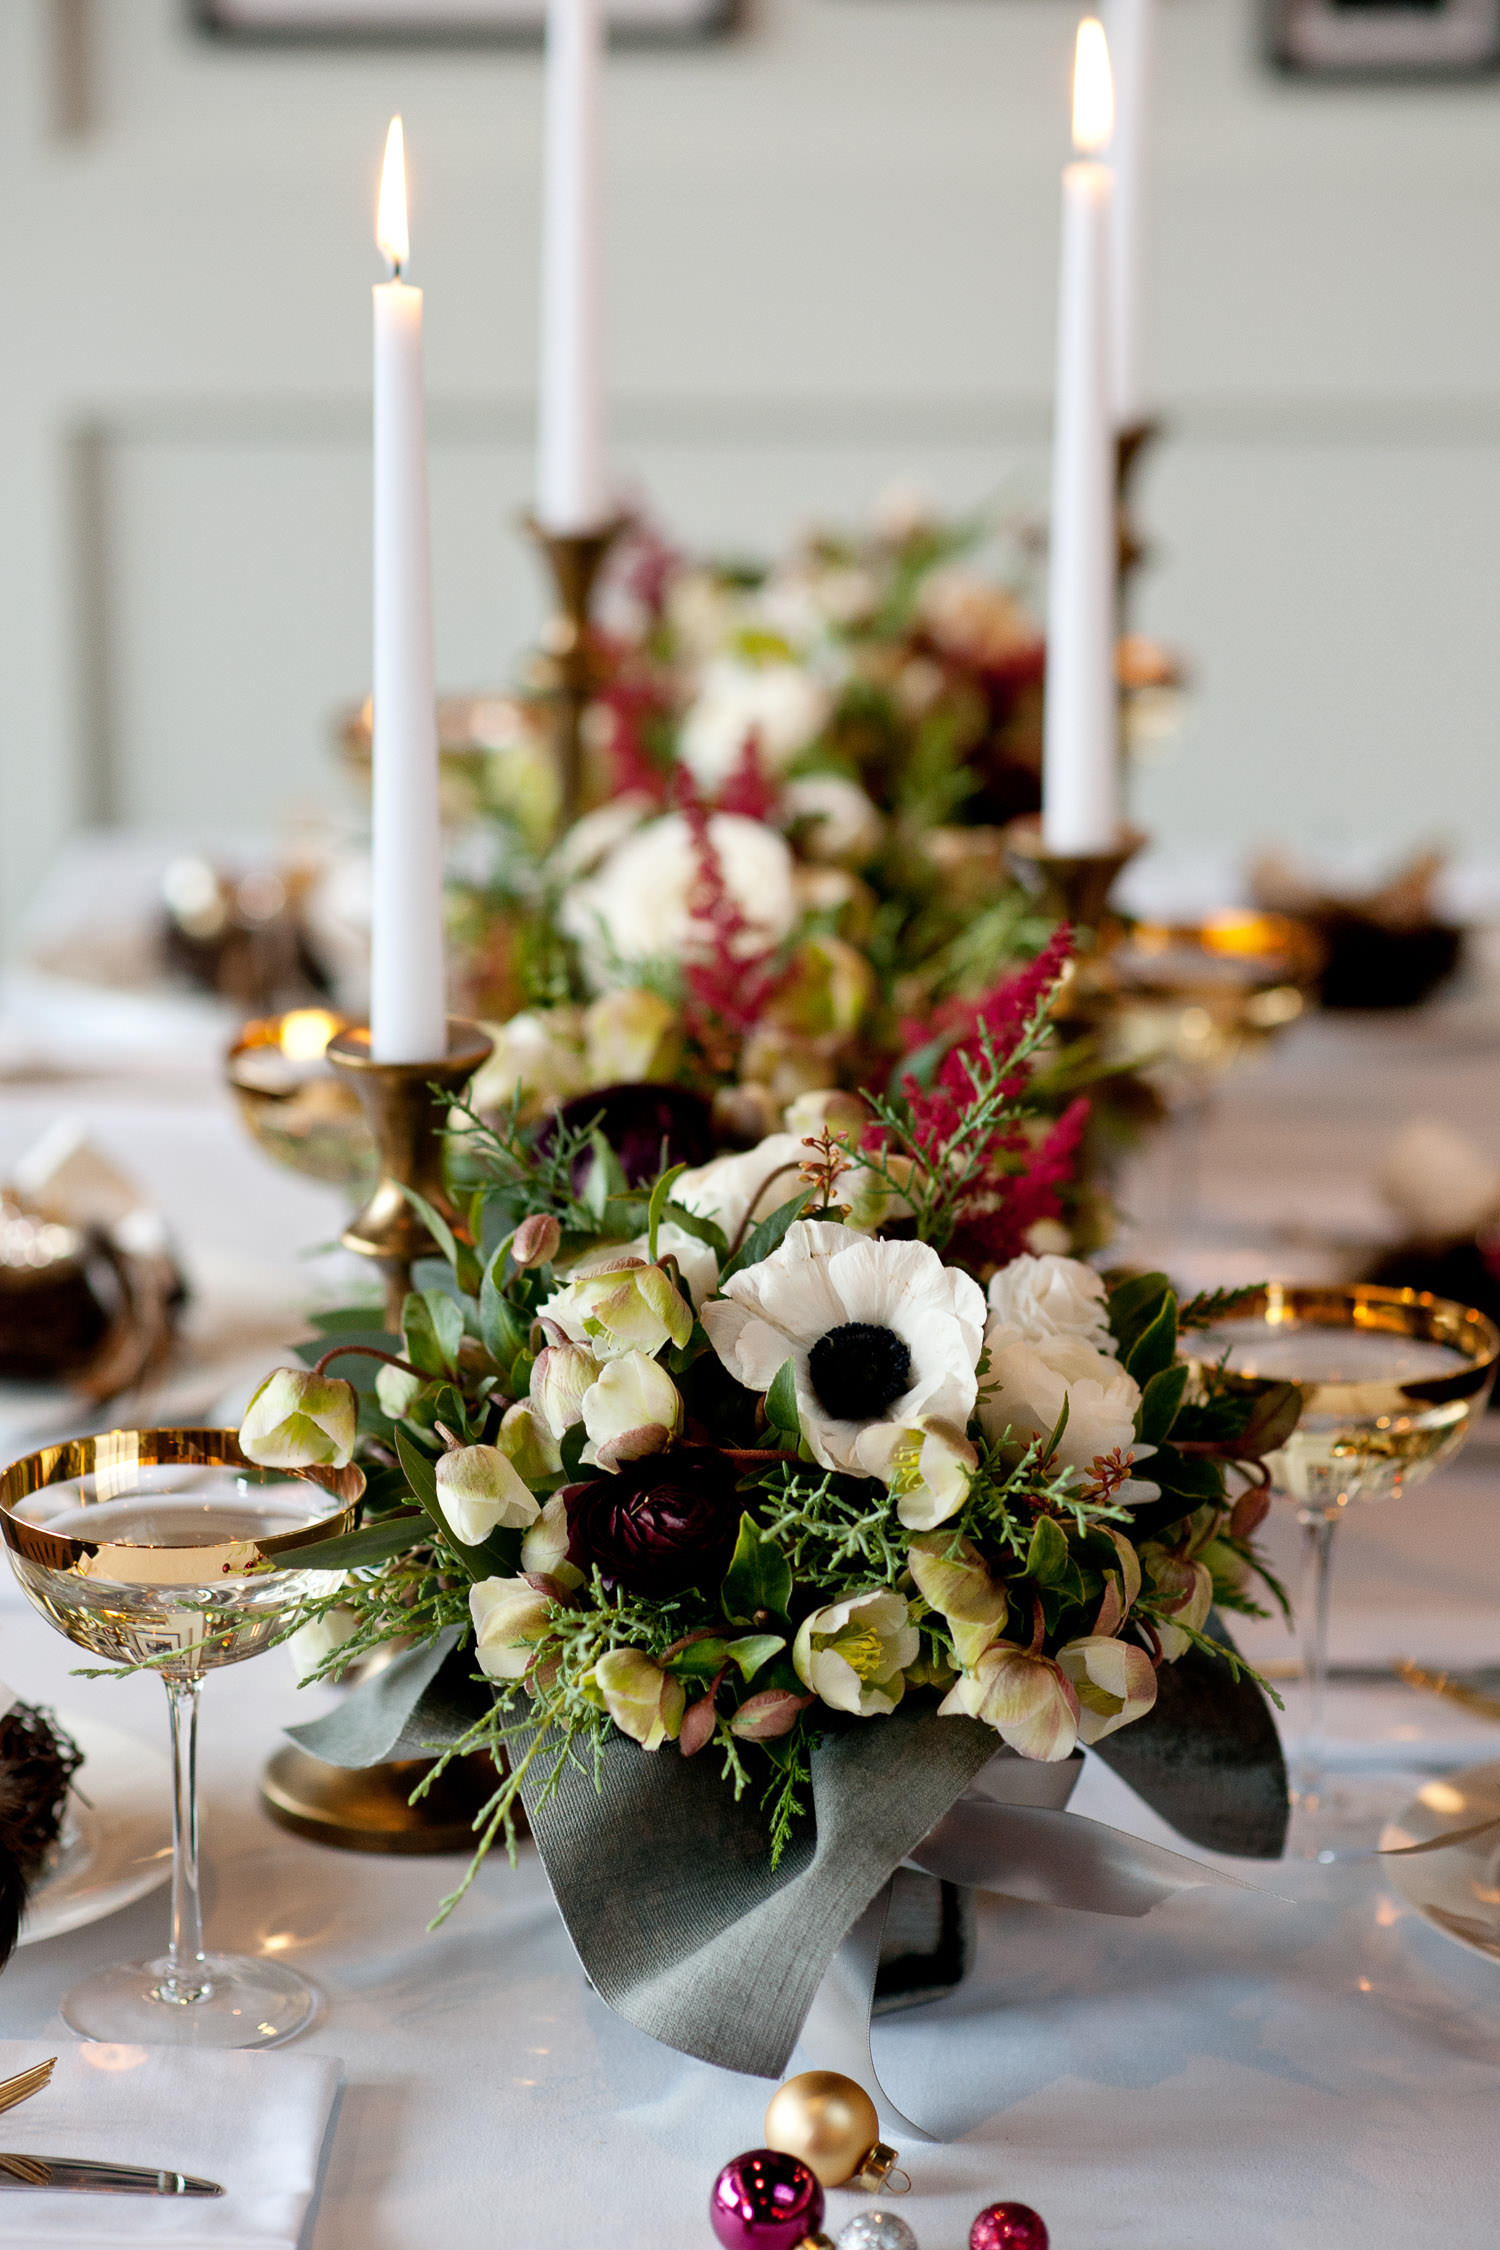 Panda anemones on a holiday table captured by Tara Whittaker Photography